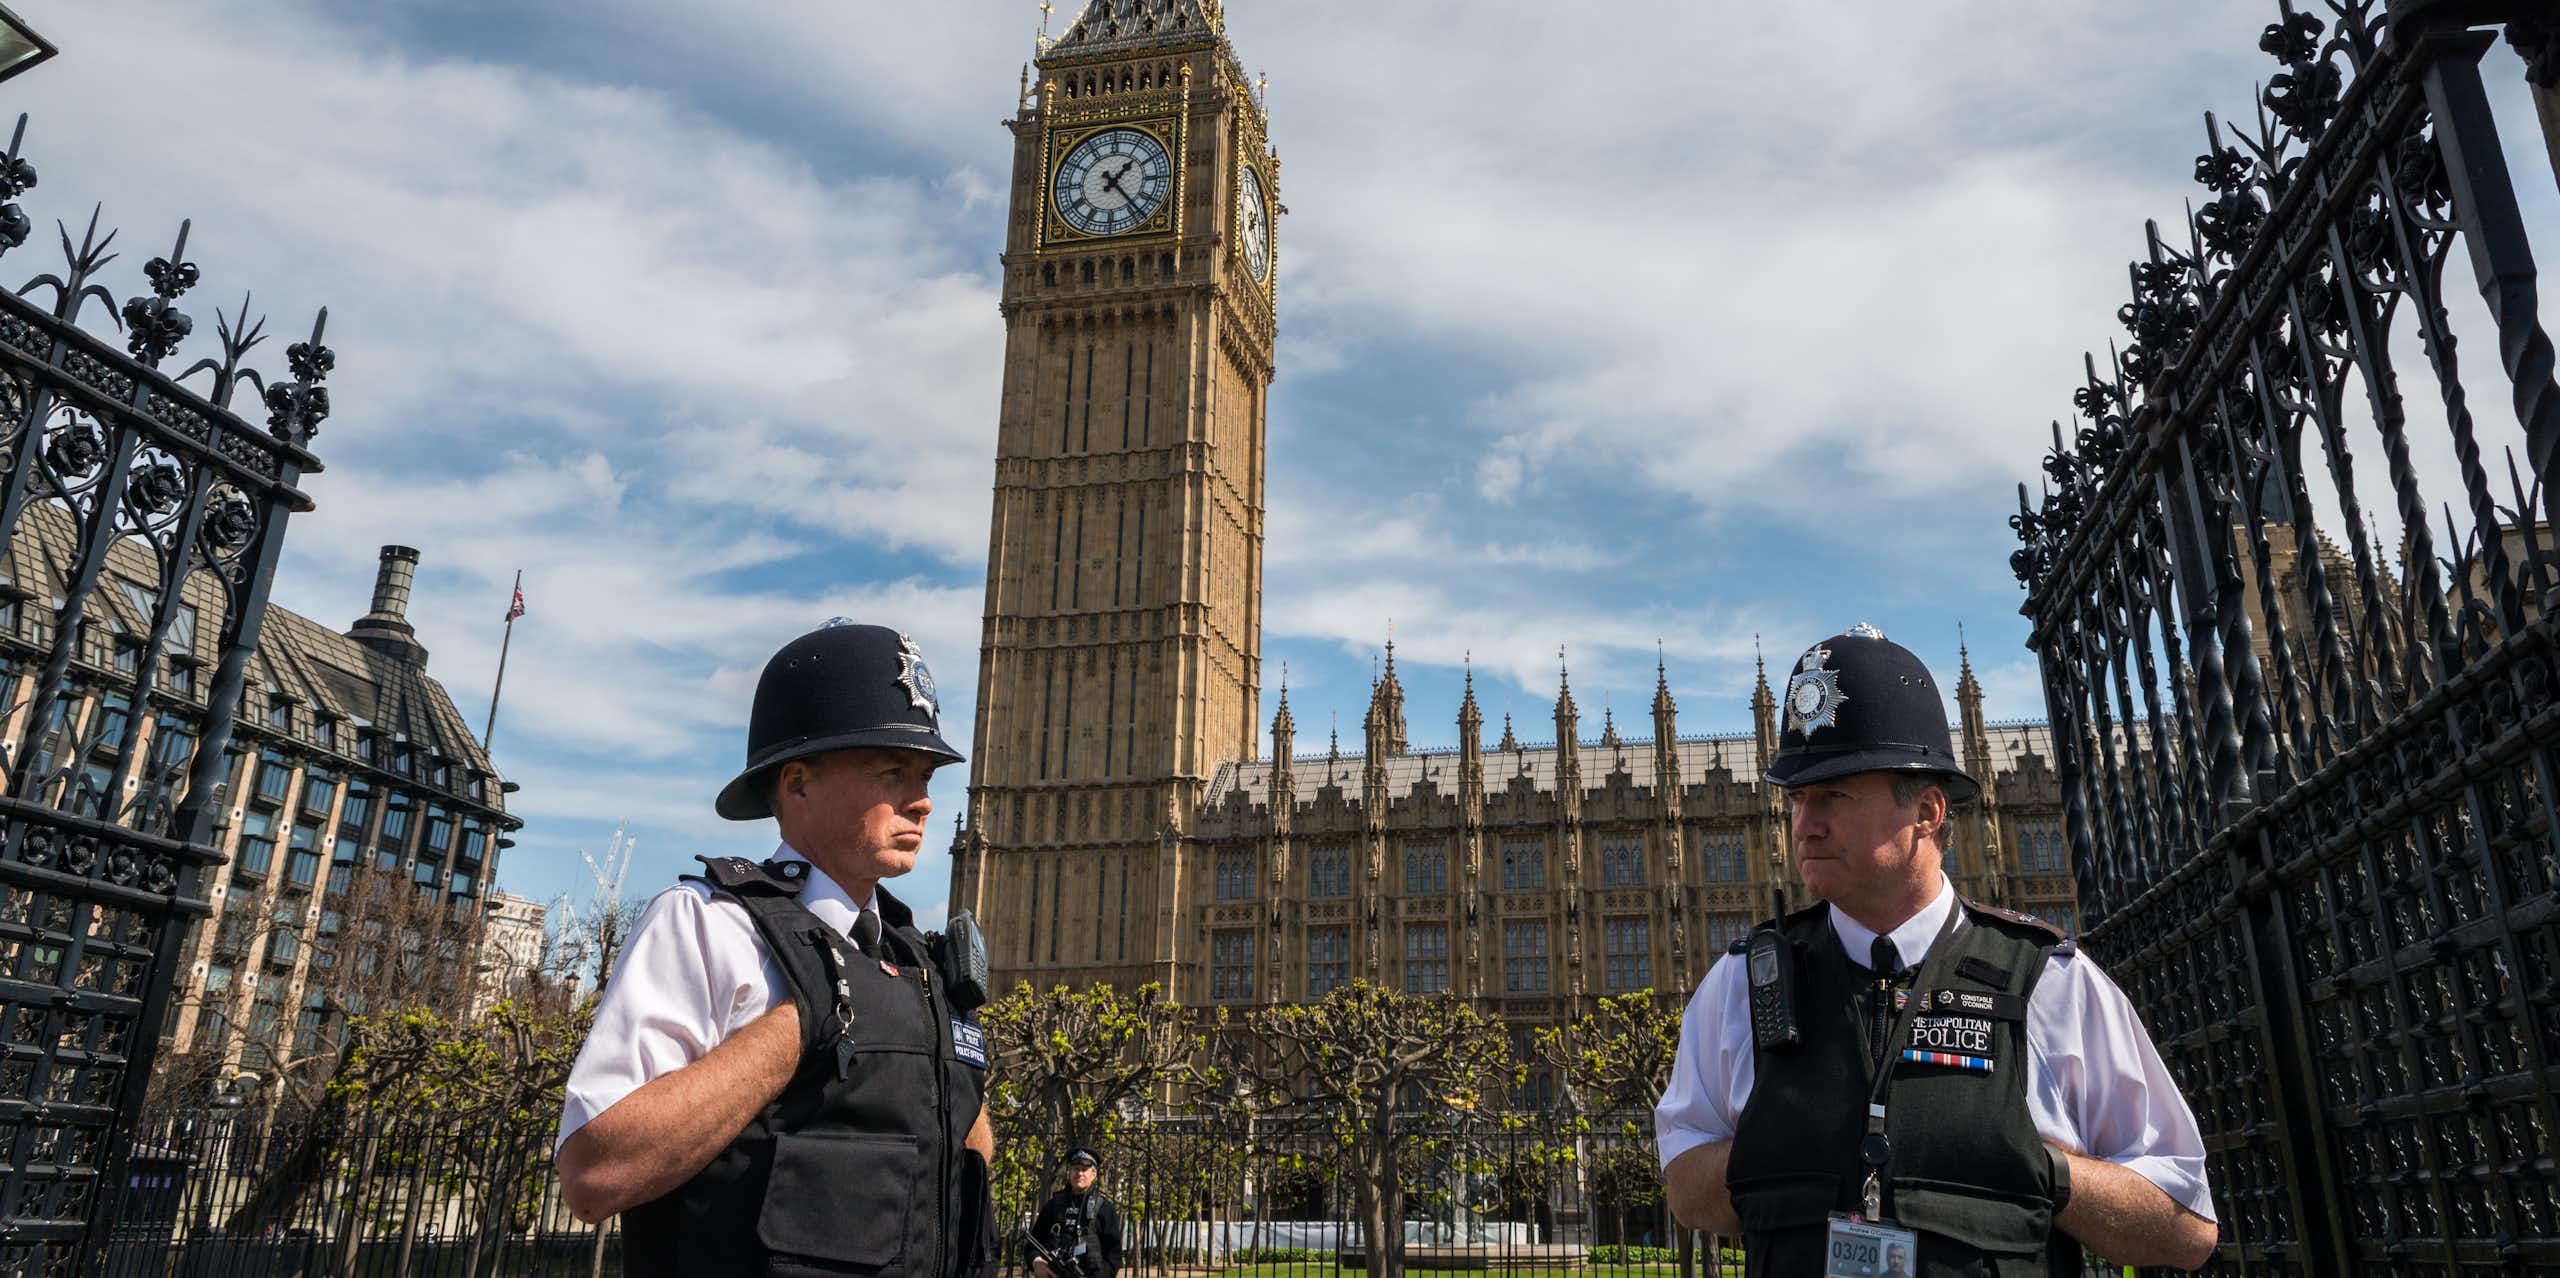 Two London police officers standing in front of Westminster palace